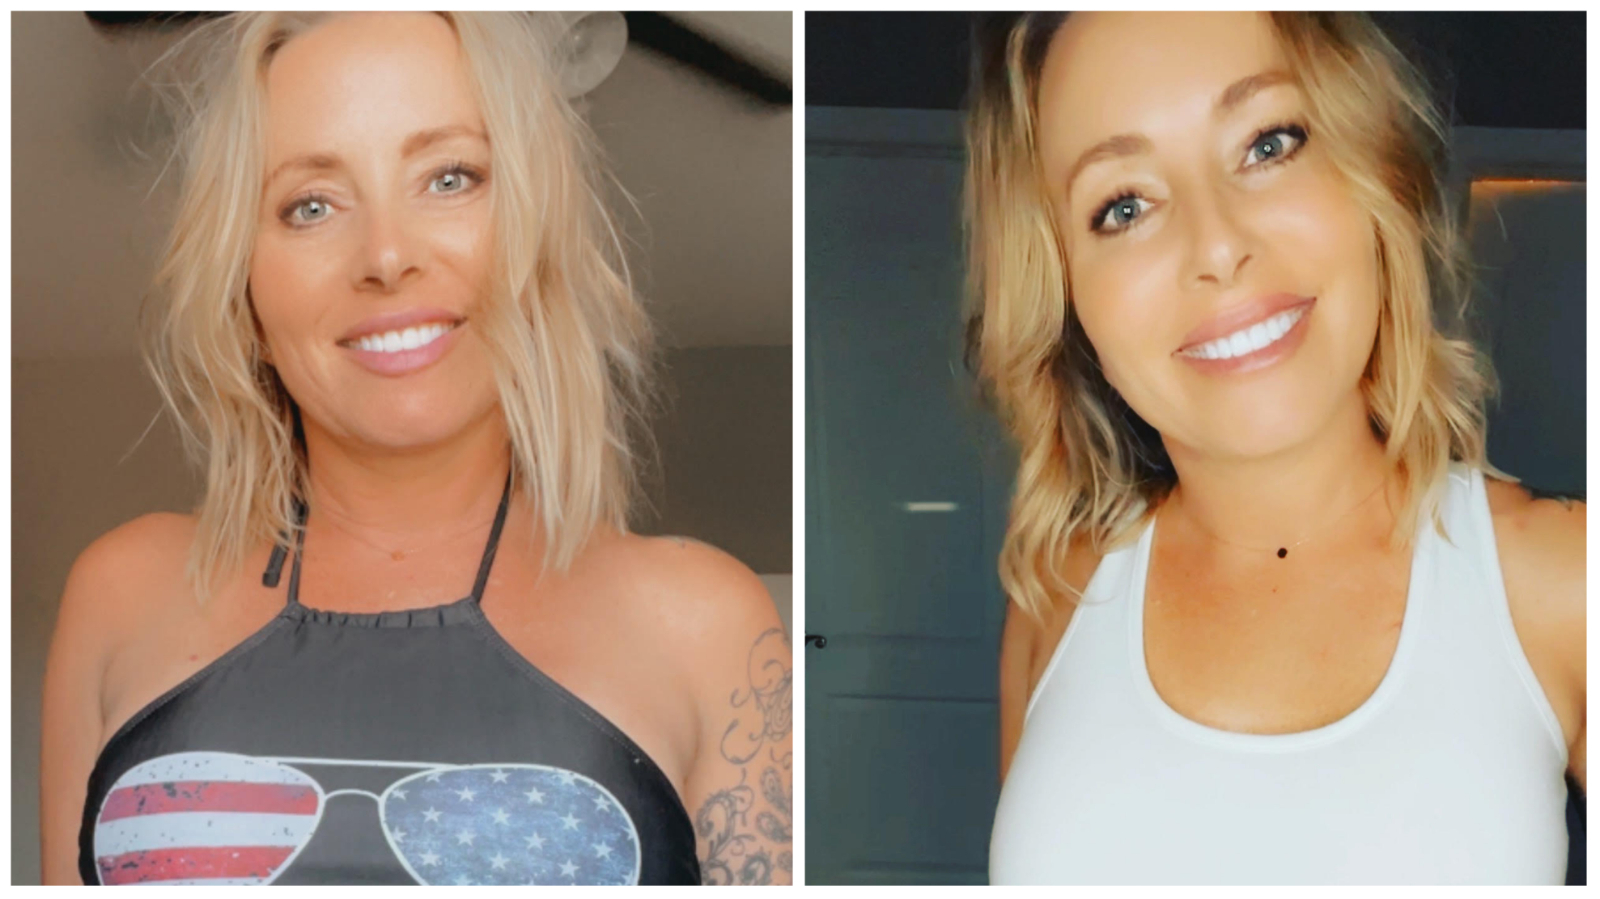 Regional Small-Town Mom Ignores The Haters While Making Big Money On Adult Site “OnlyFans” Your Wyoming News Source pic